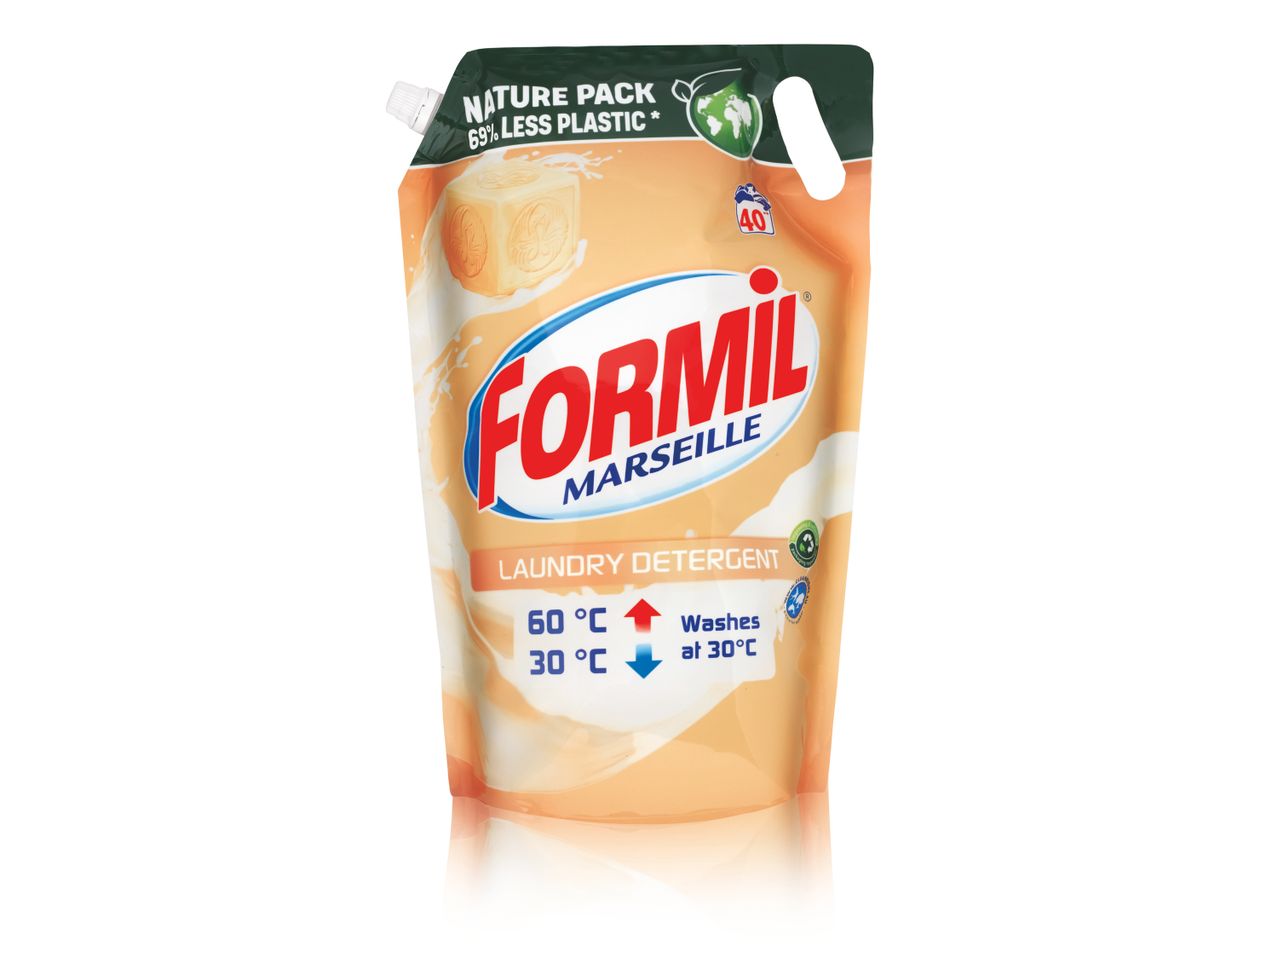 Go to full screen view: Marseille Laundry Detergent - Image 1